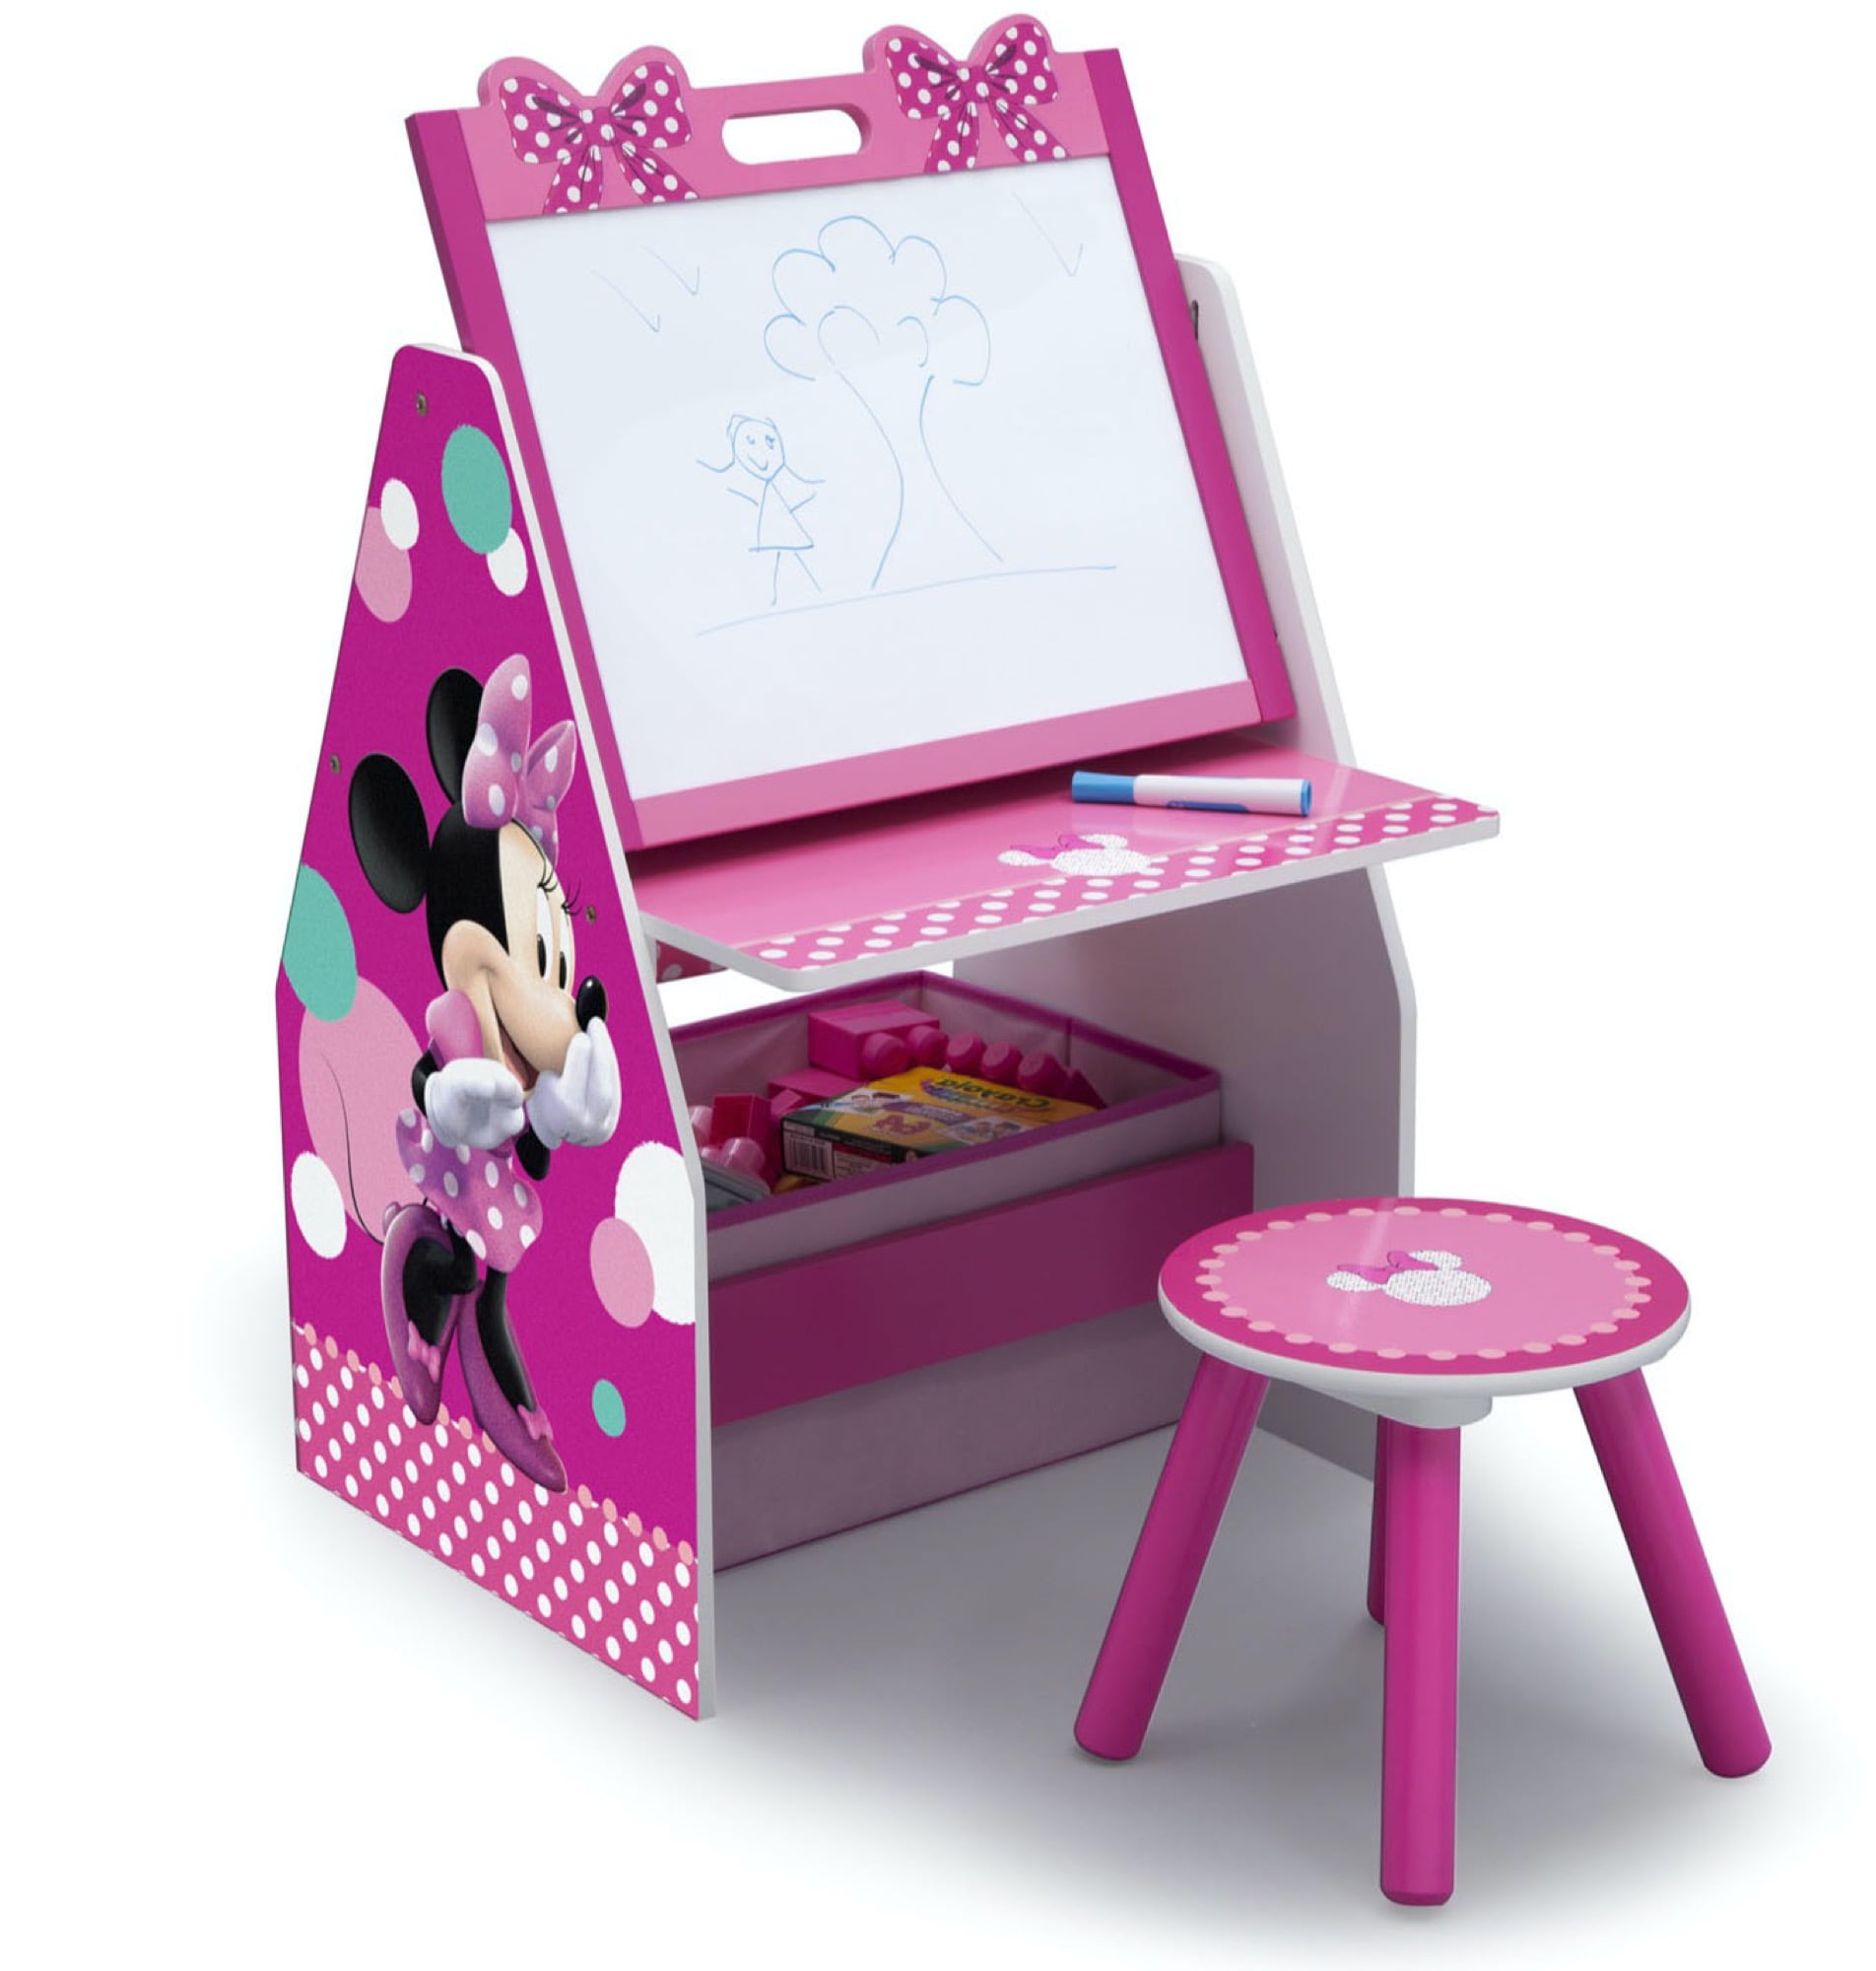 Learning Projector Drawing  Desk Play set  Boys Girl Creative Kit stool  w/case 